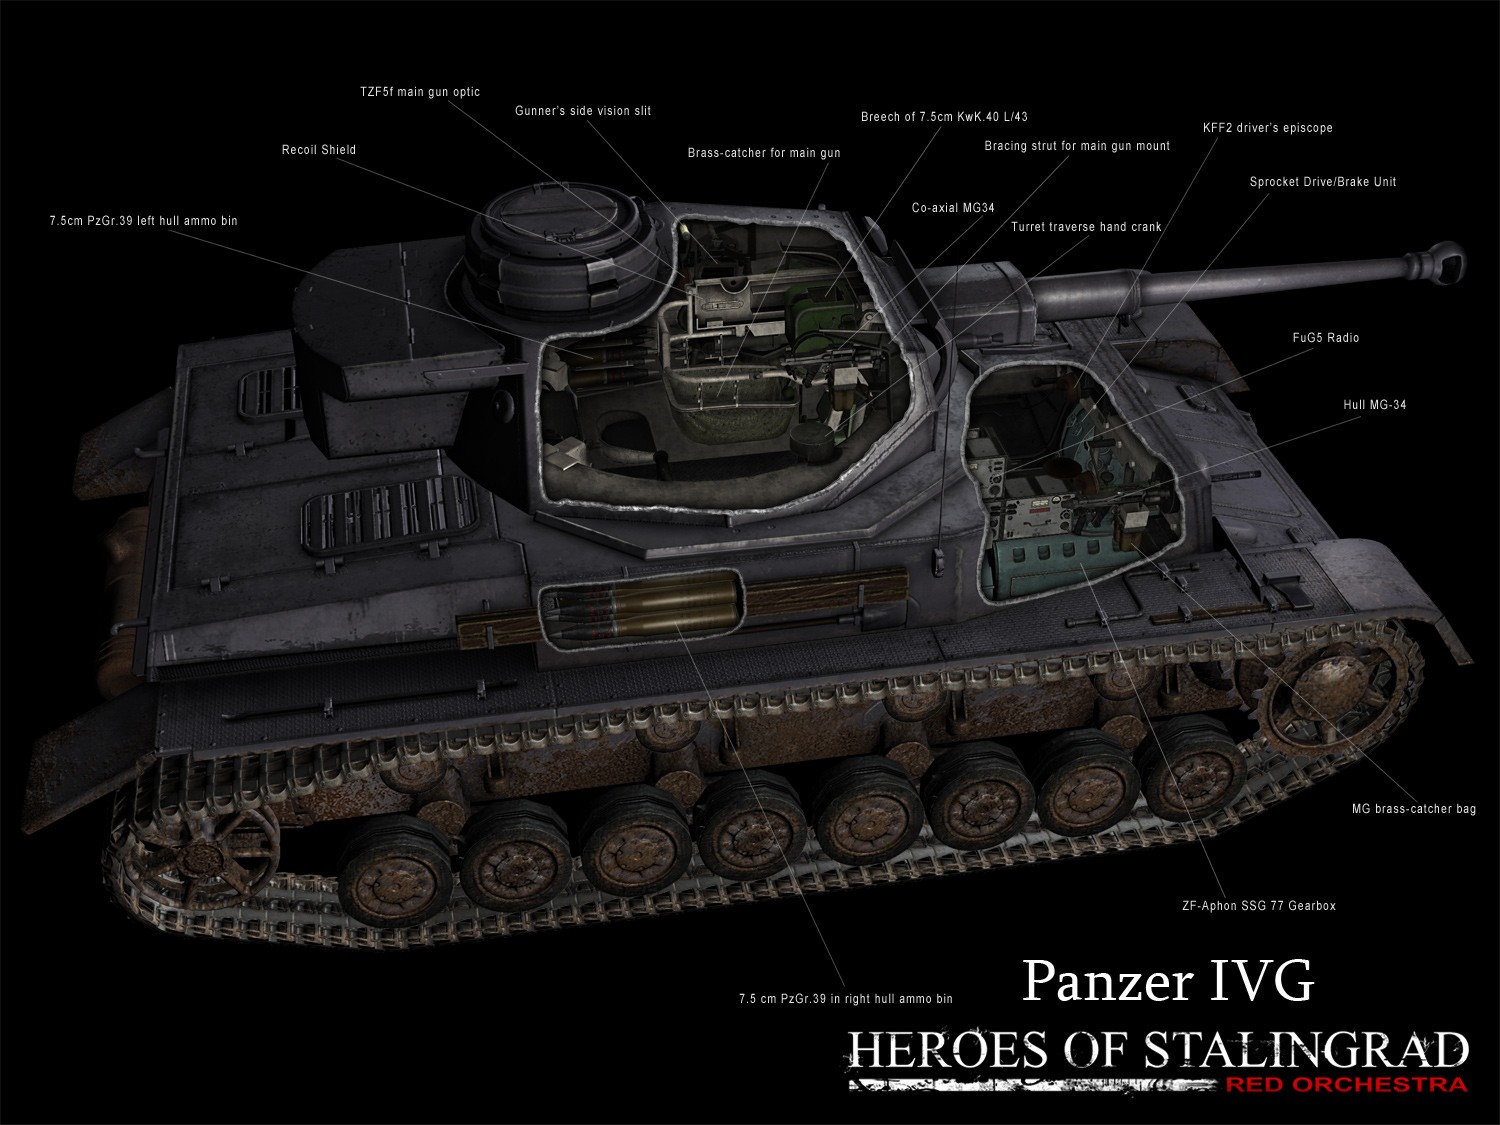 red orchestra 2 heroes of stalingrad skirmish